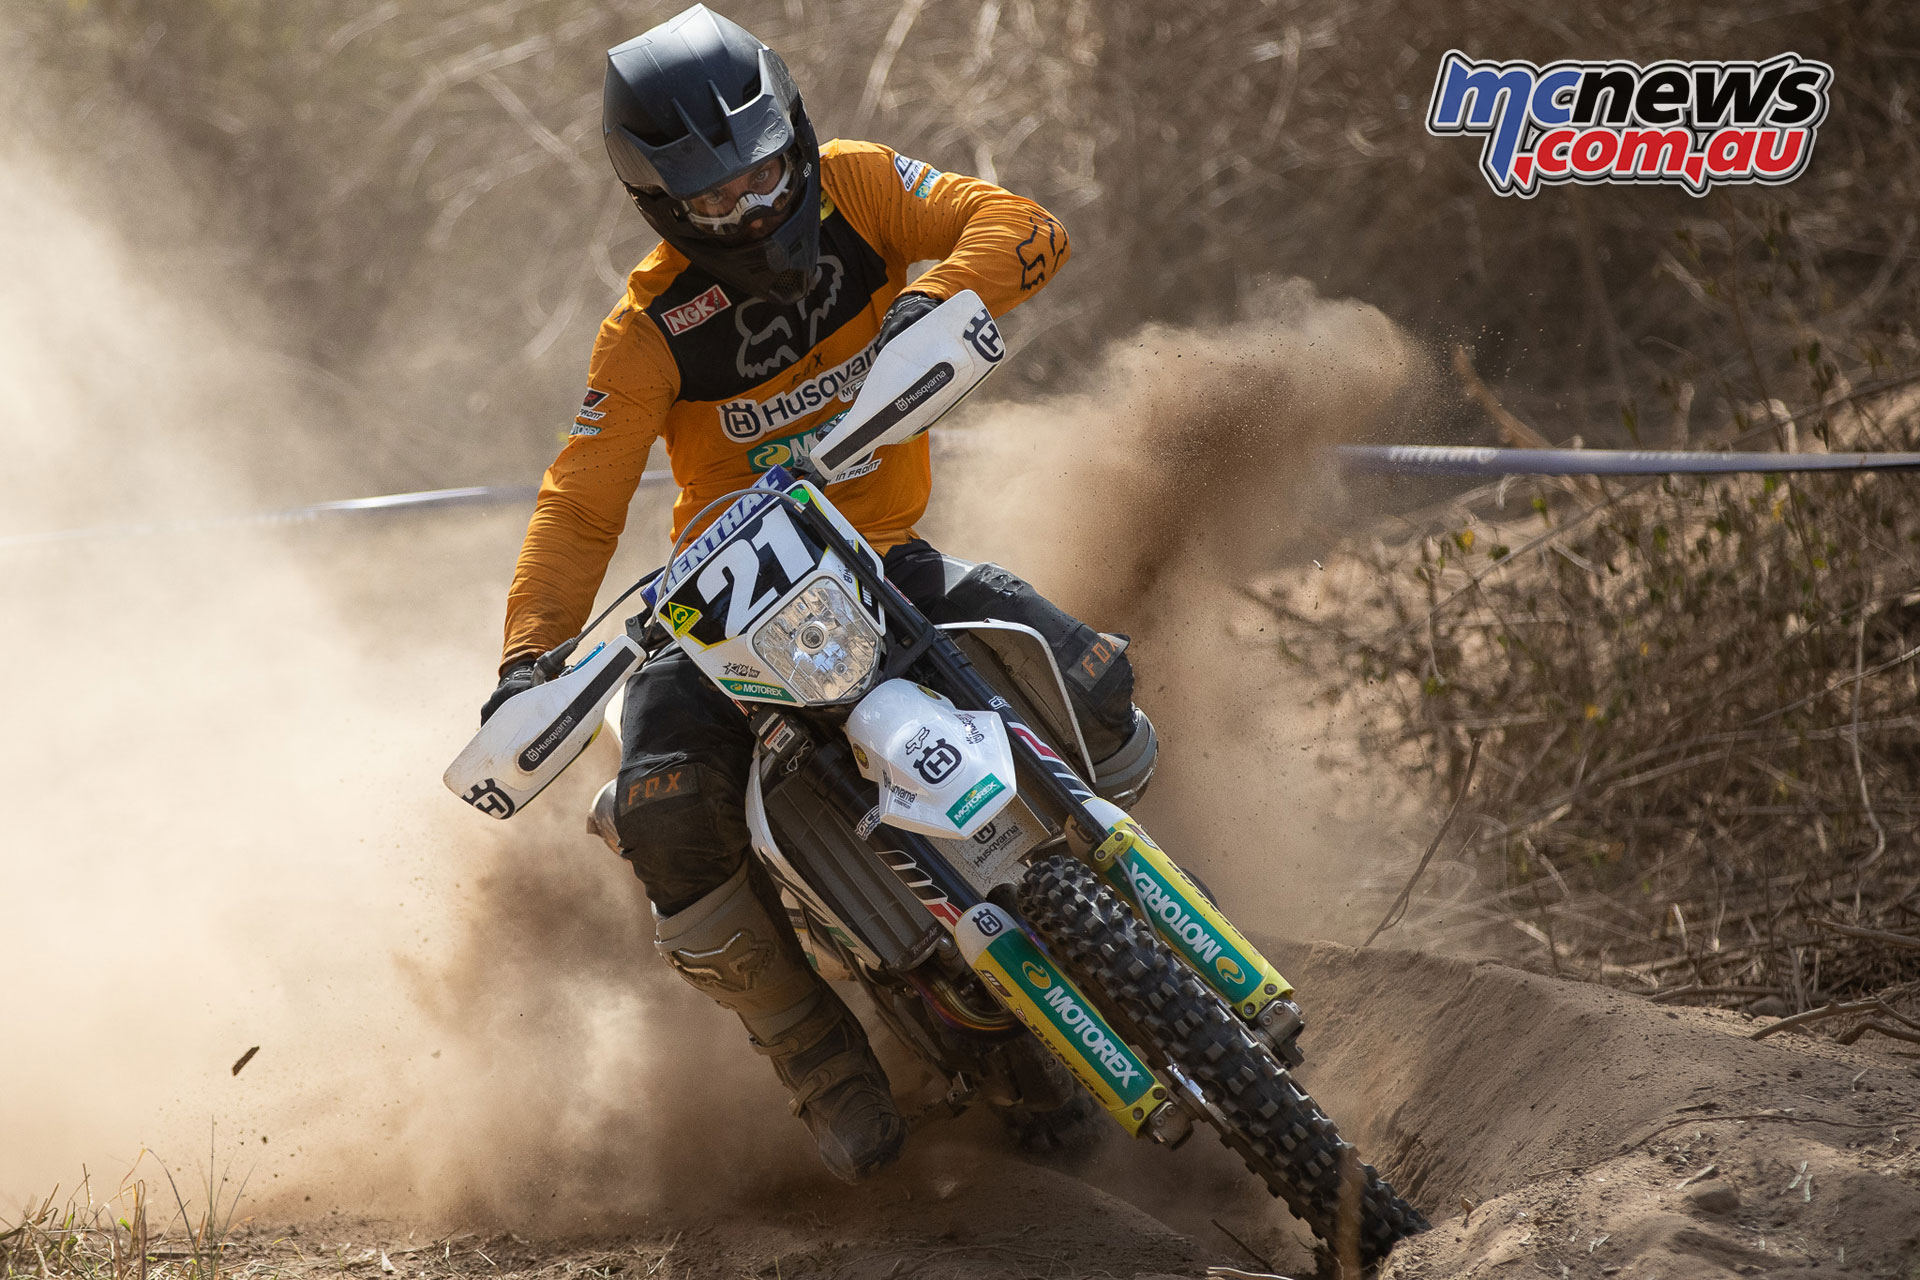 AORC Rounds 1 & 2 at Toowoomba with John Pearson